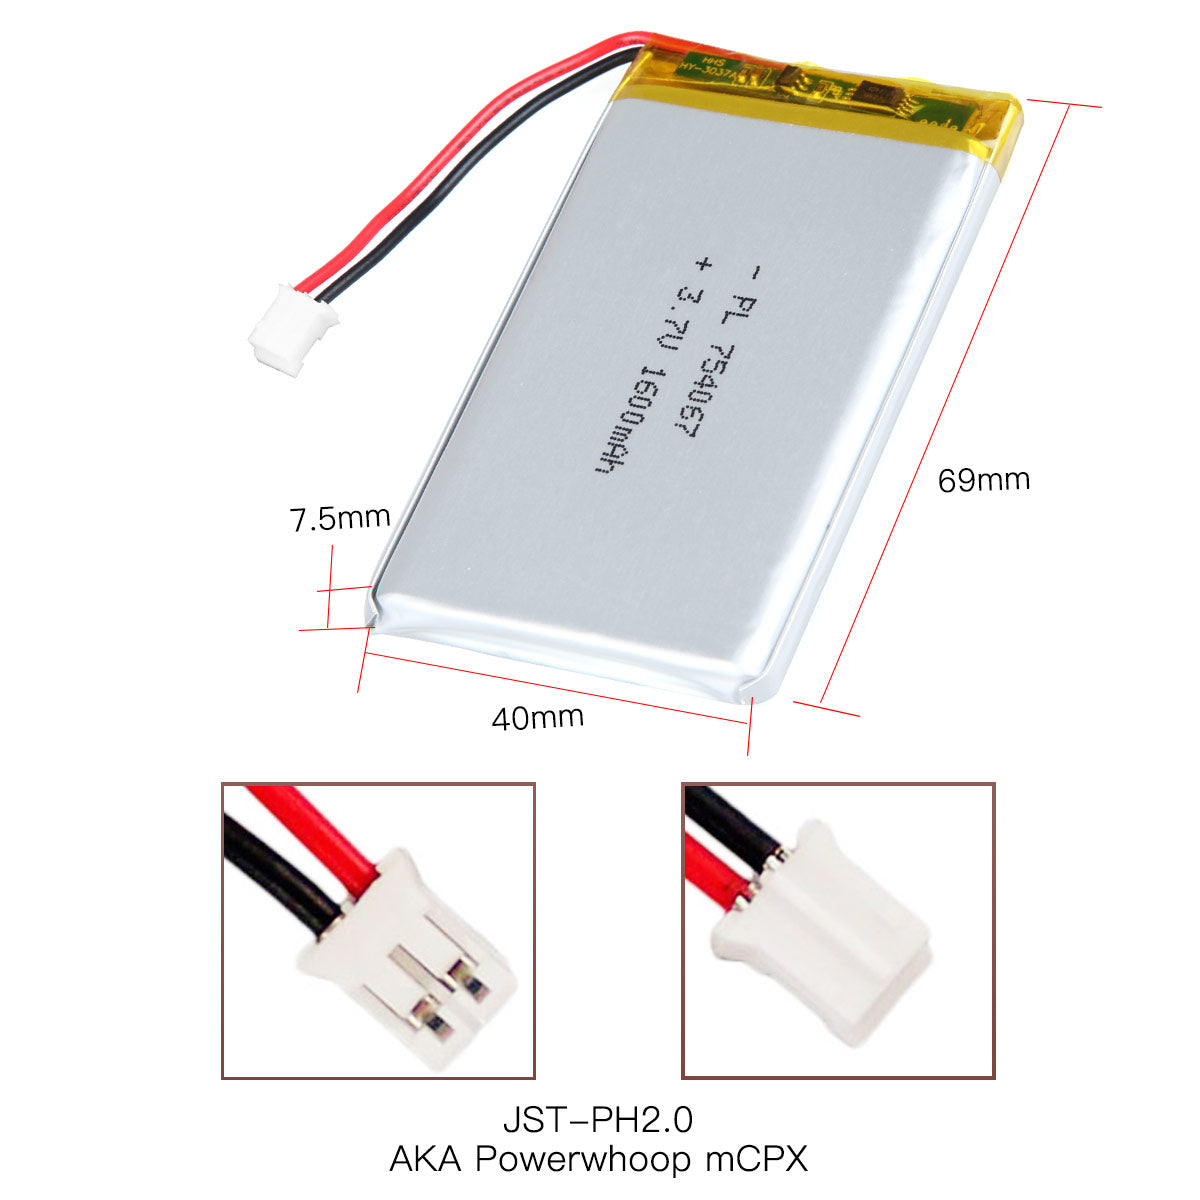 YDL 3.7V 1600mAh 754067 Rechargeable Lithium Polymer Battery